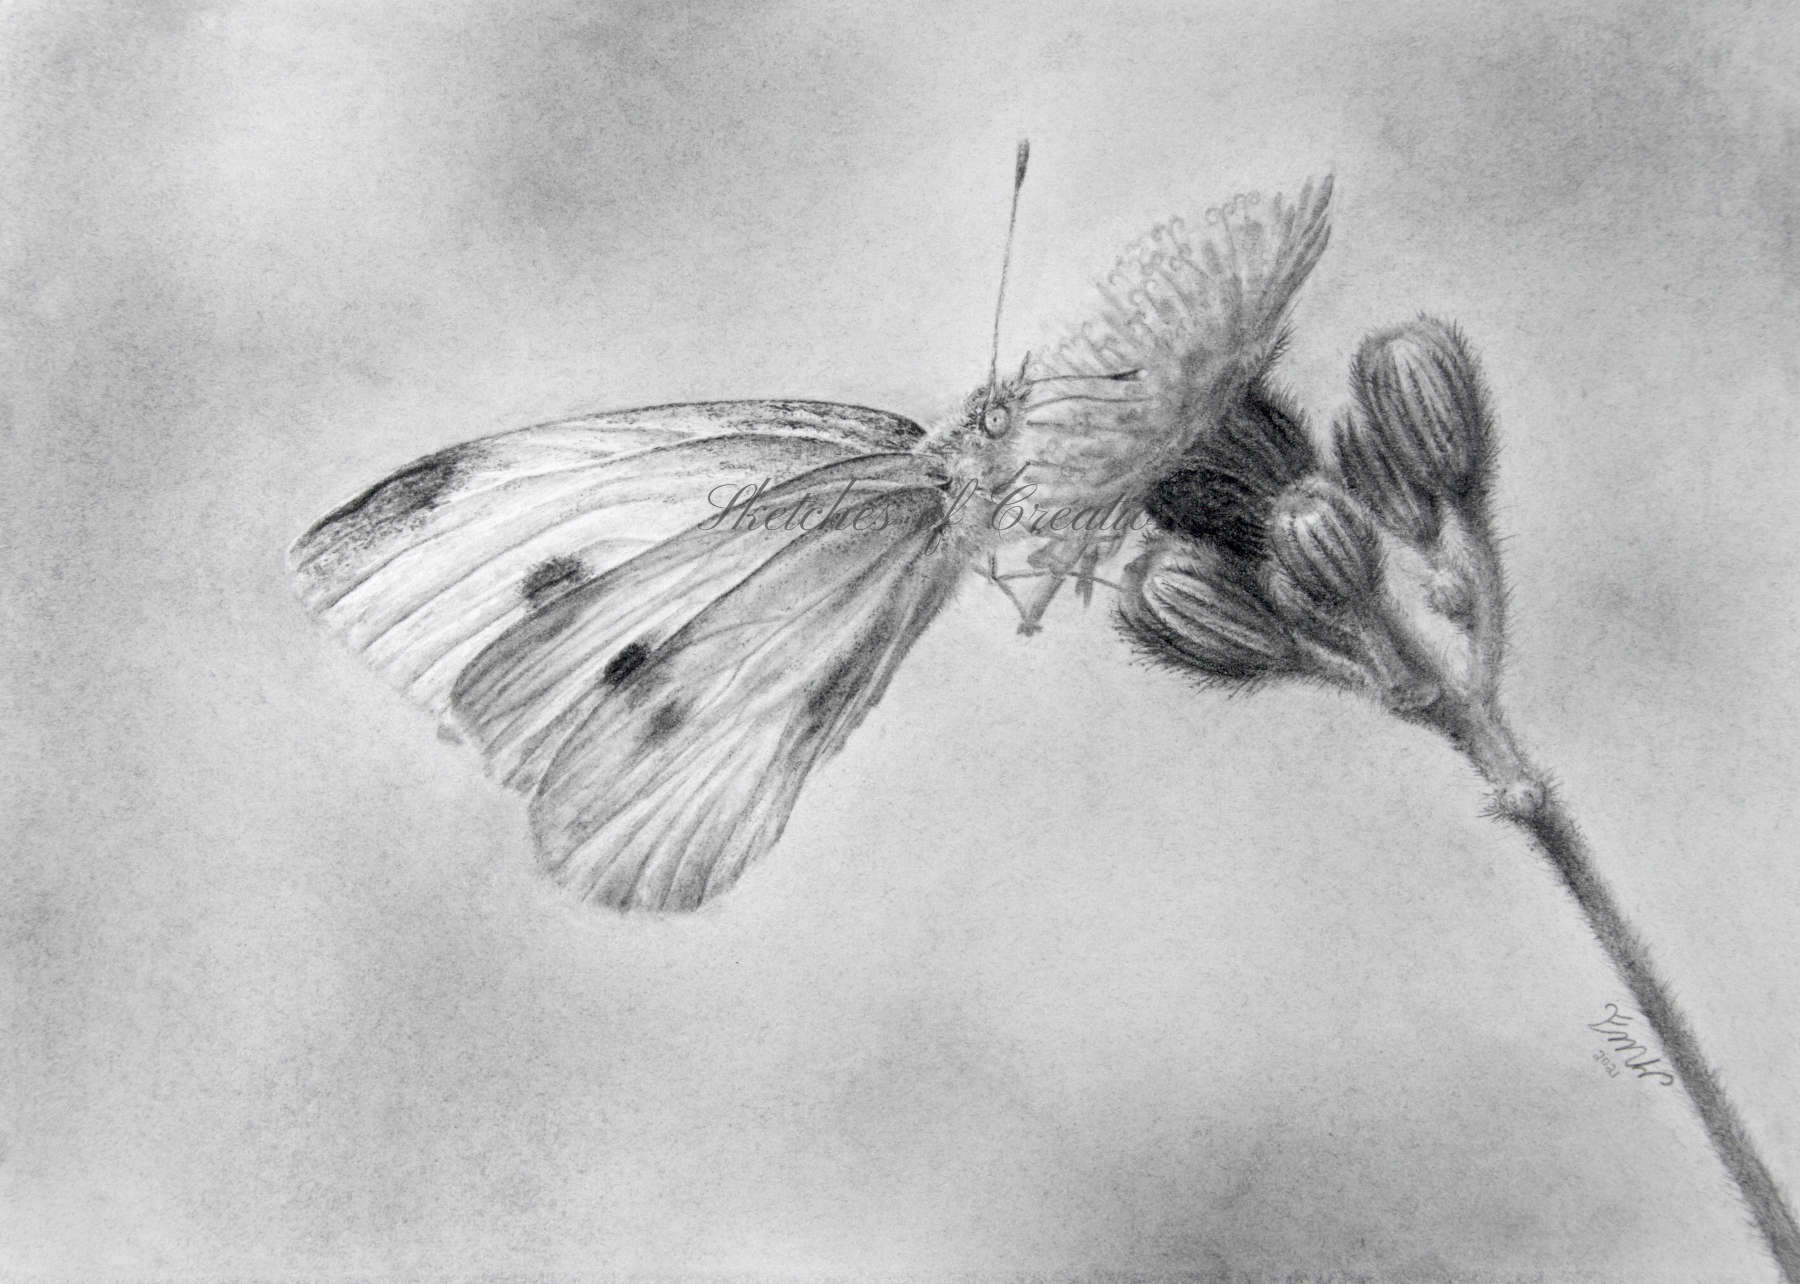 'Cabbage White' a drawing of a Cabbage White butterfly on a flower. approximately 5x7 inches plus deckled edge. Completed February 2021